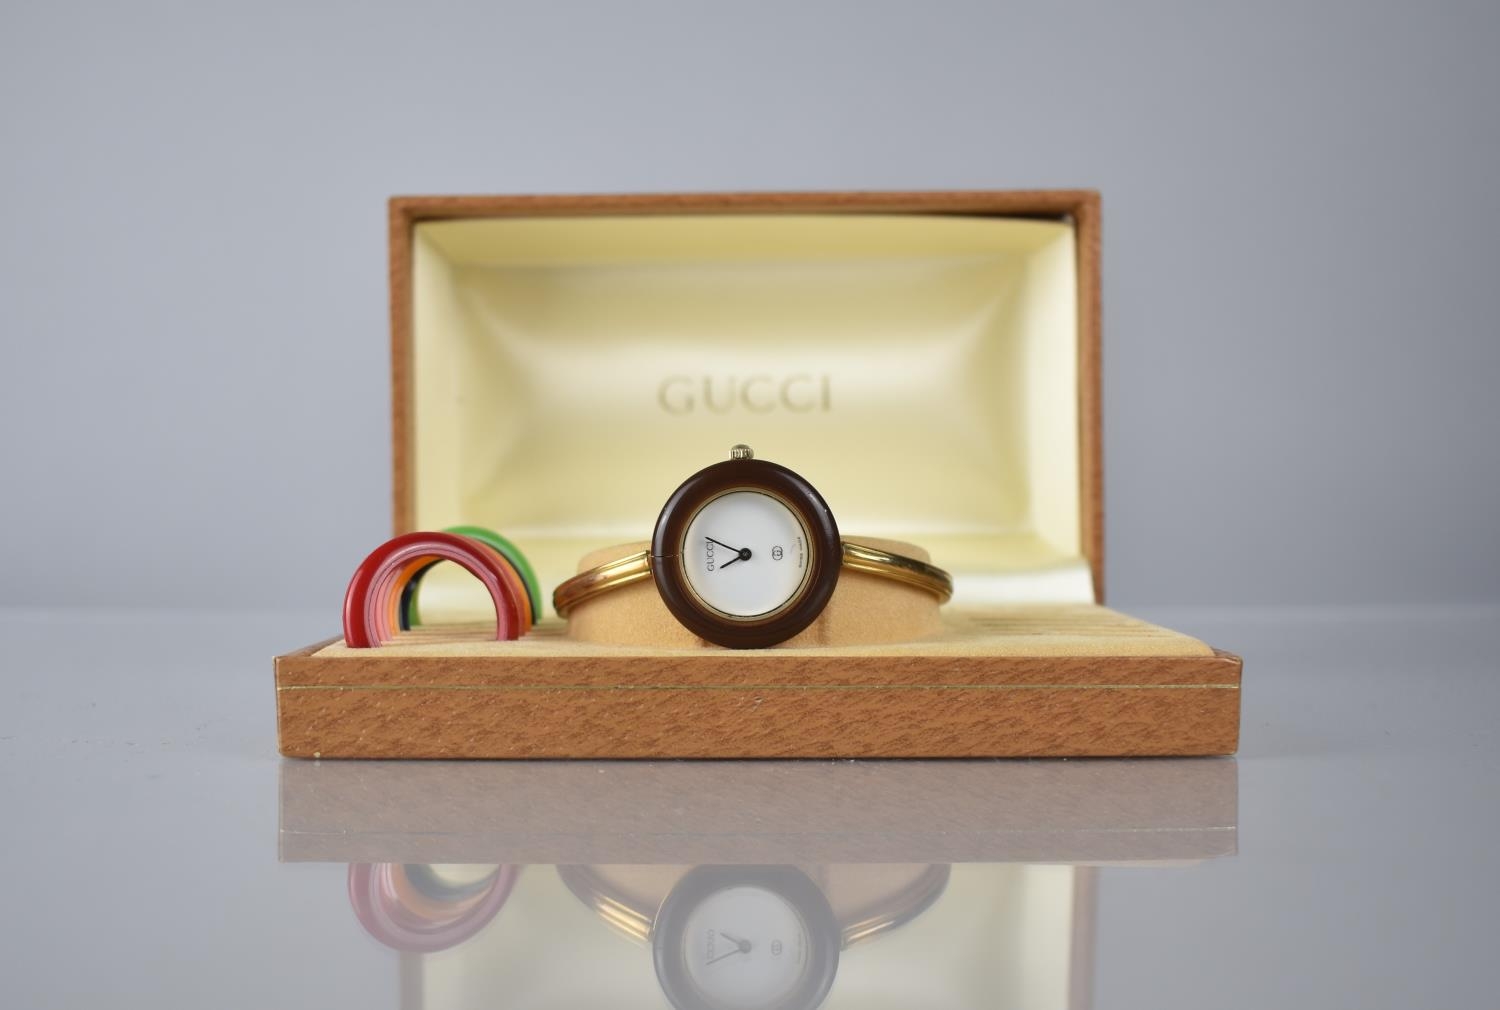 A Boxed Gucci Wrist Watch, White Enamel Dial Inscribed Gucci, Gold Coloured Hands, Interchangeable - Image 4 of 4